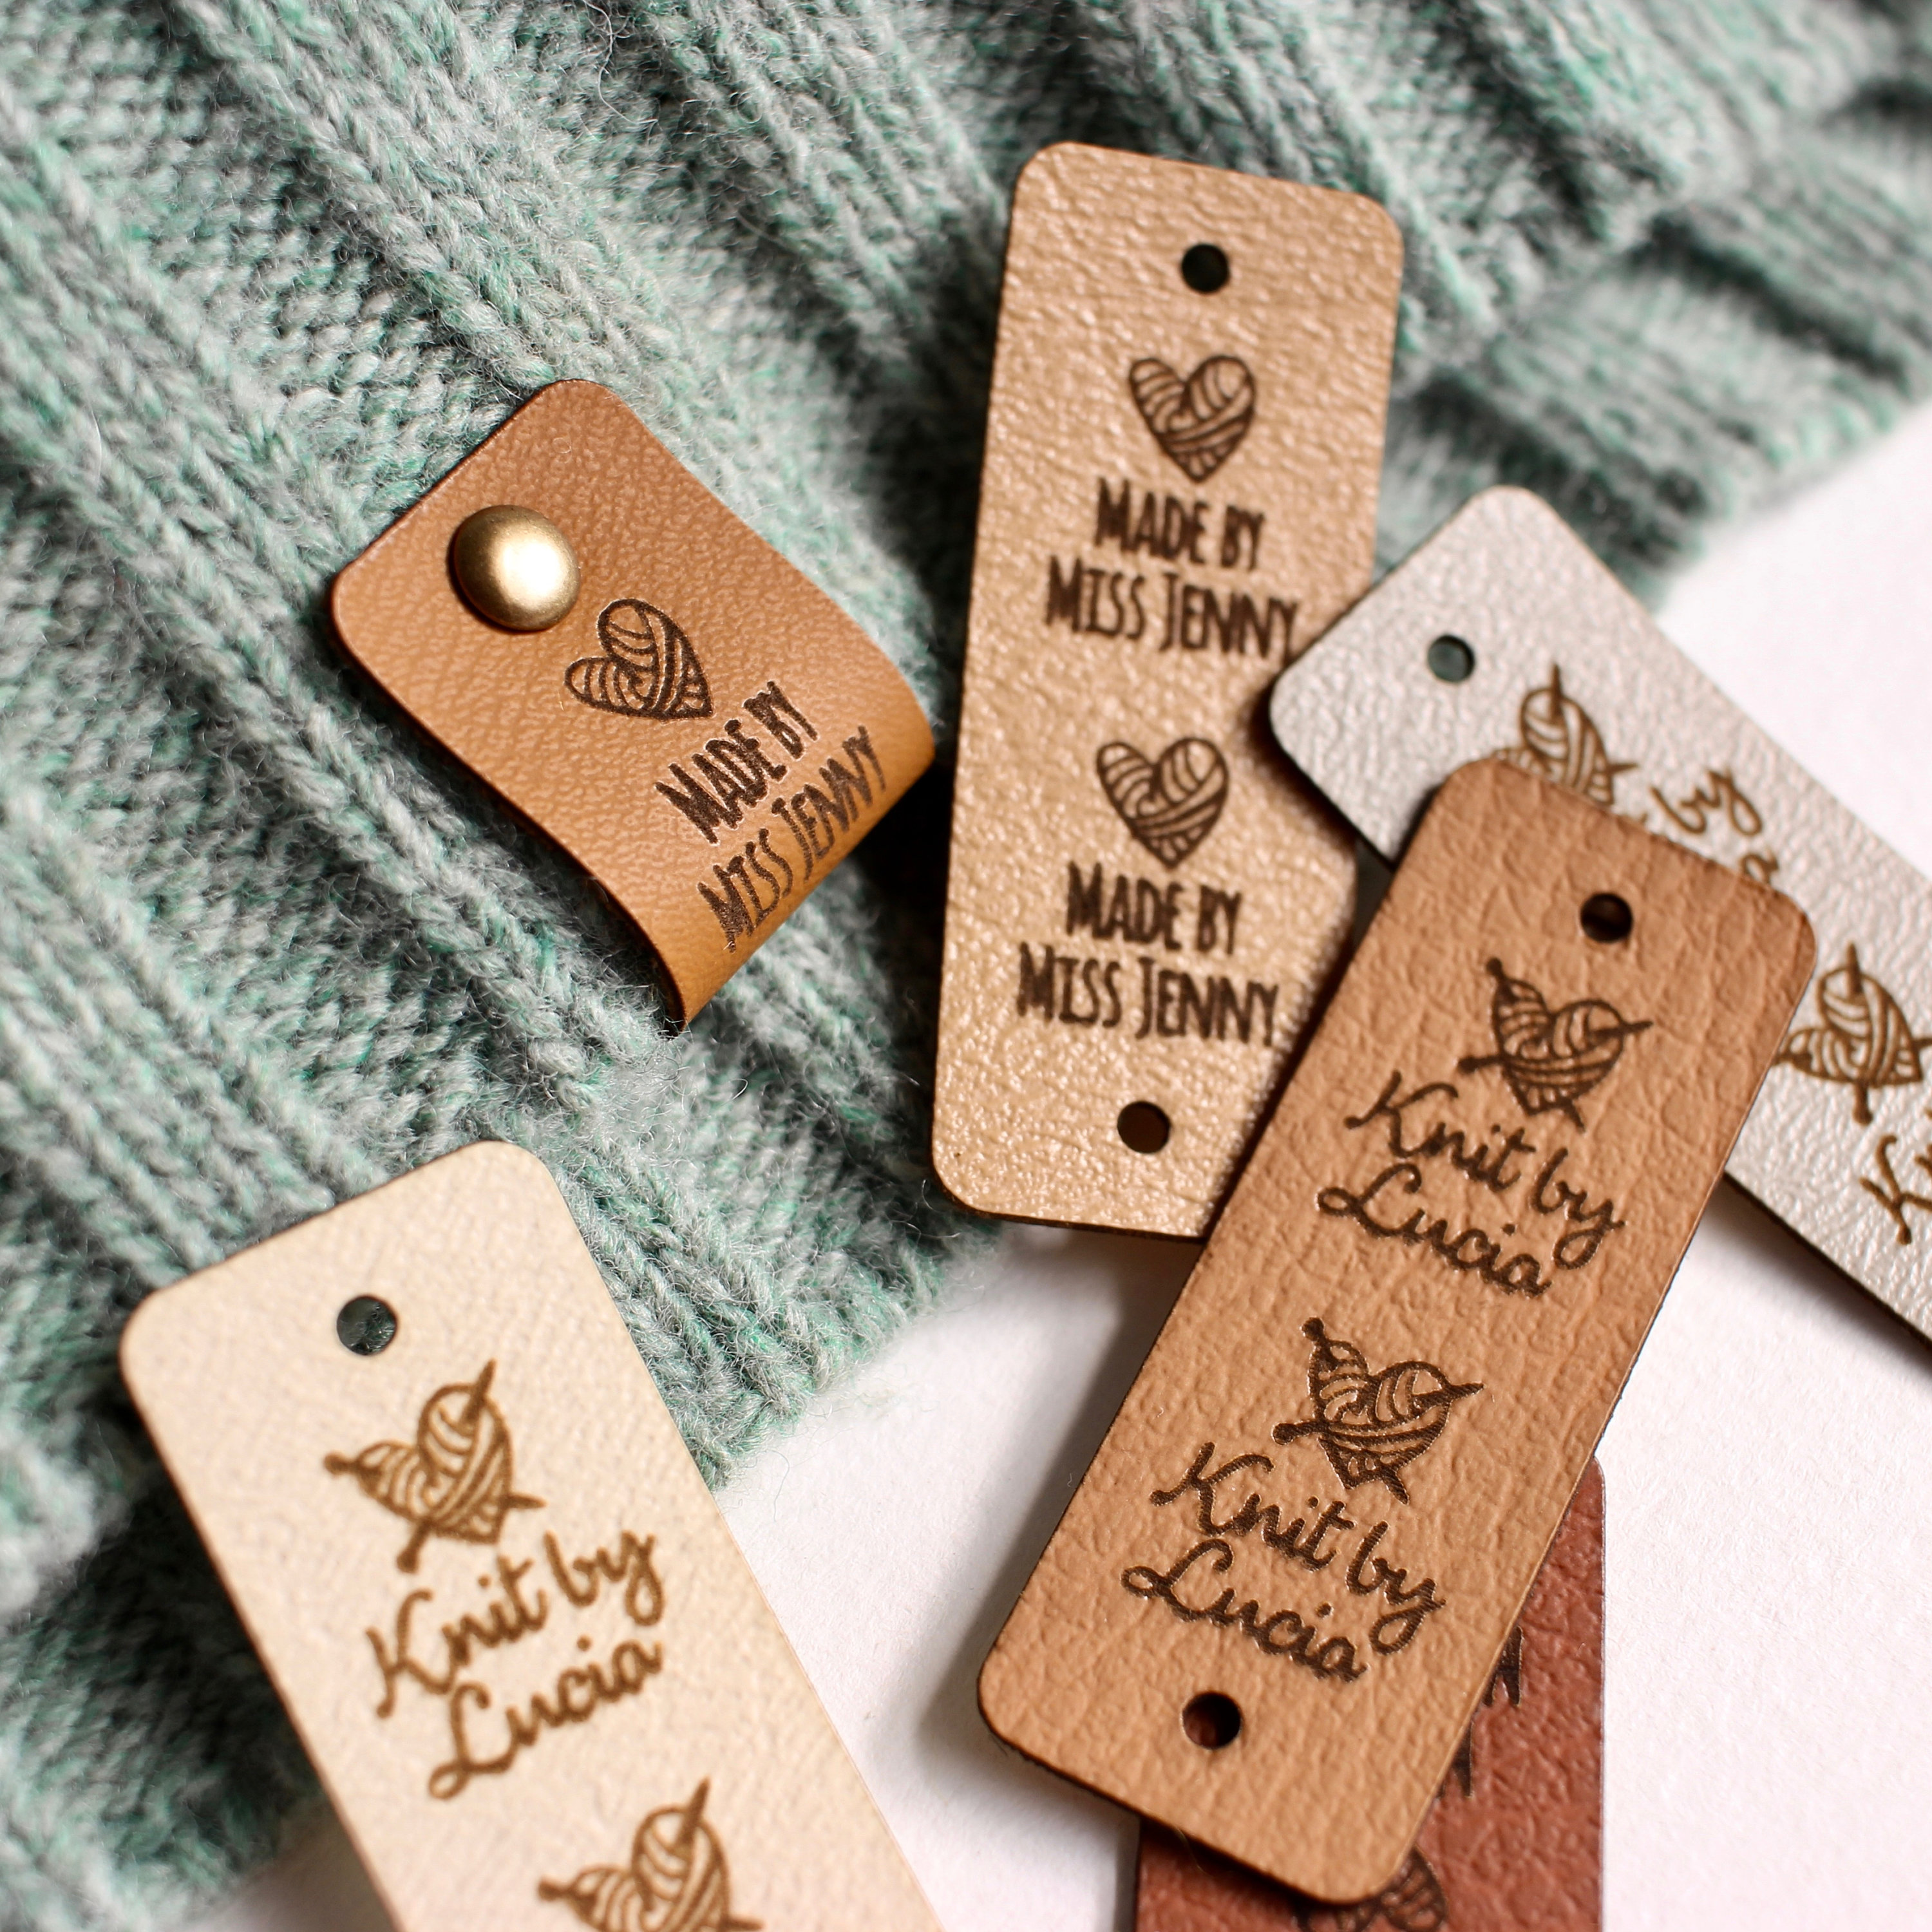 Leather Crochet Tags & Rivet Knitting Labels - custom leather